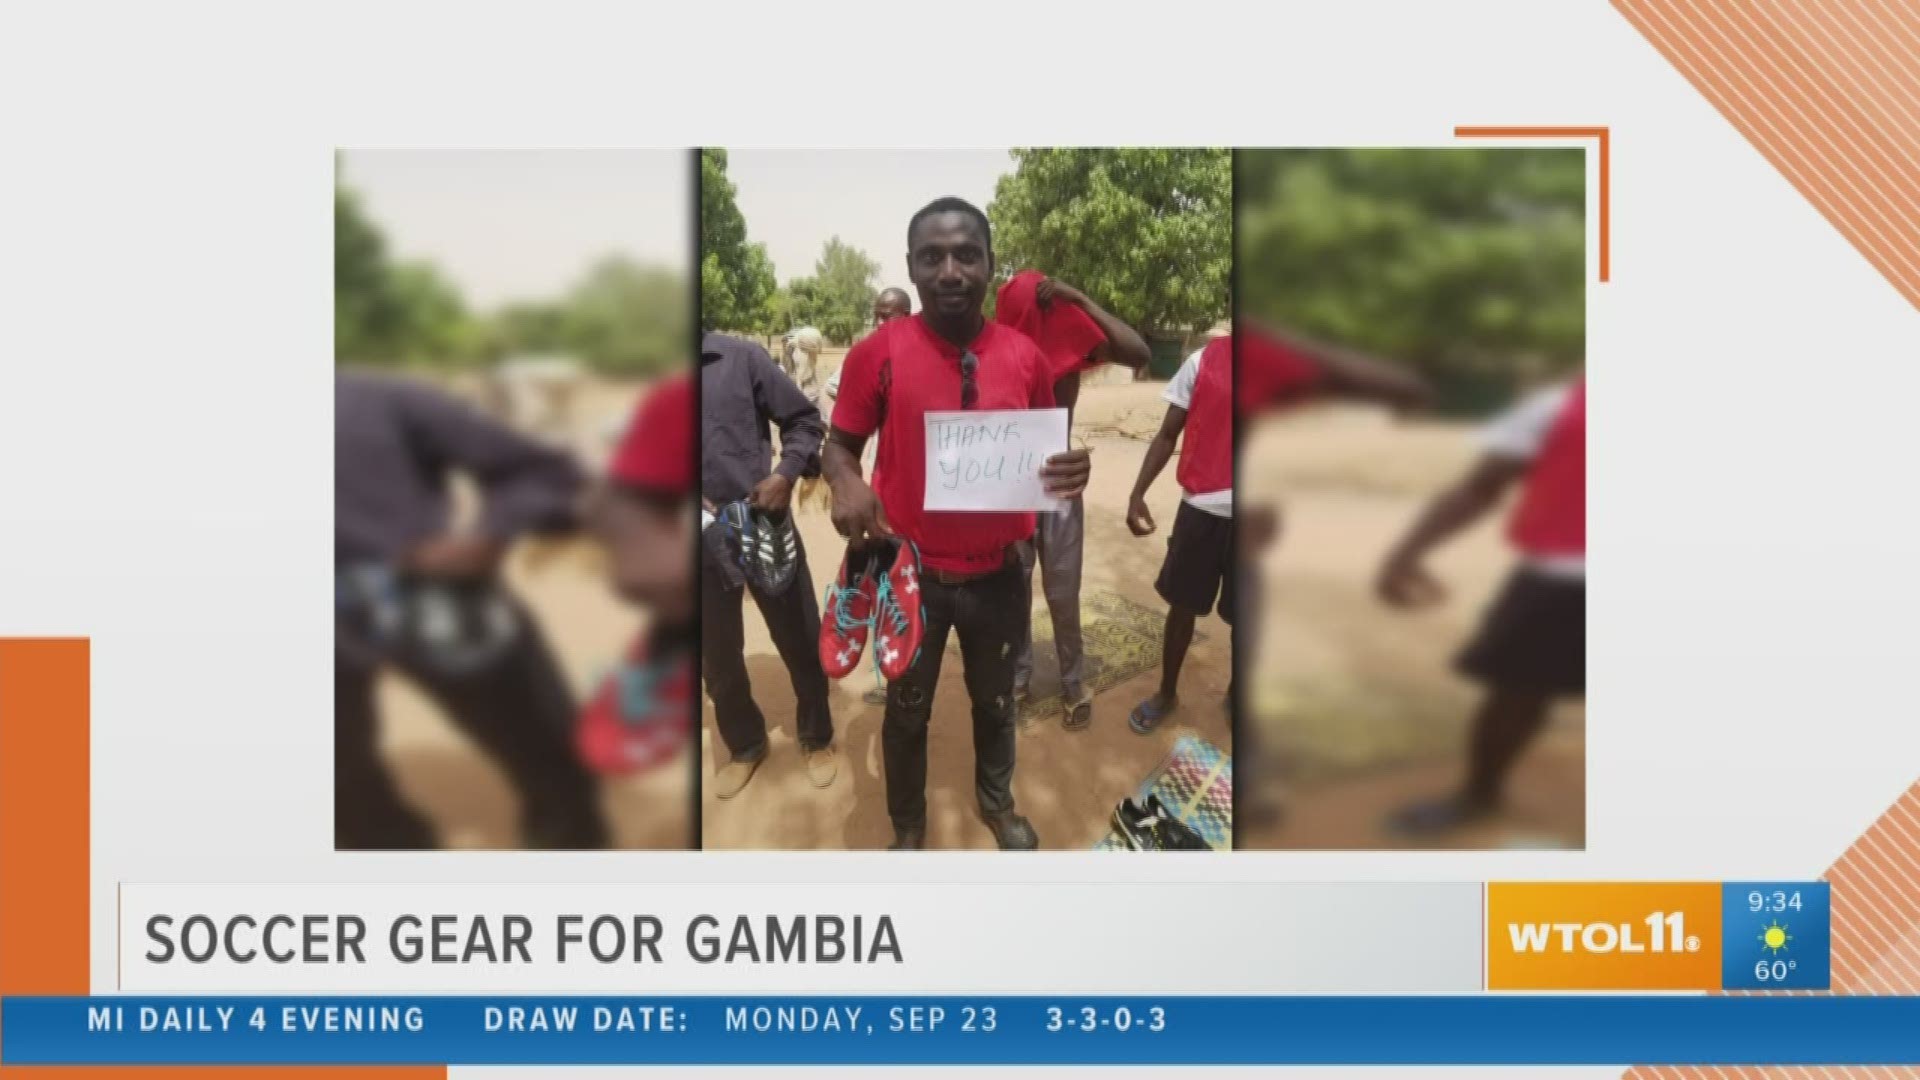 What can you do with your kids' old soccer gear? Send it to children in Gambia so they can enjoy the sport, too!